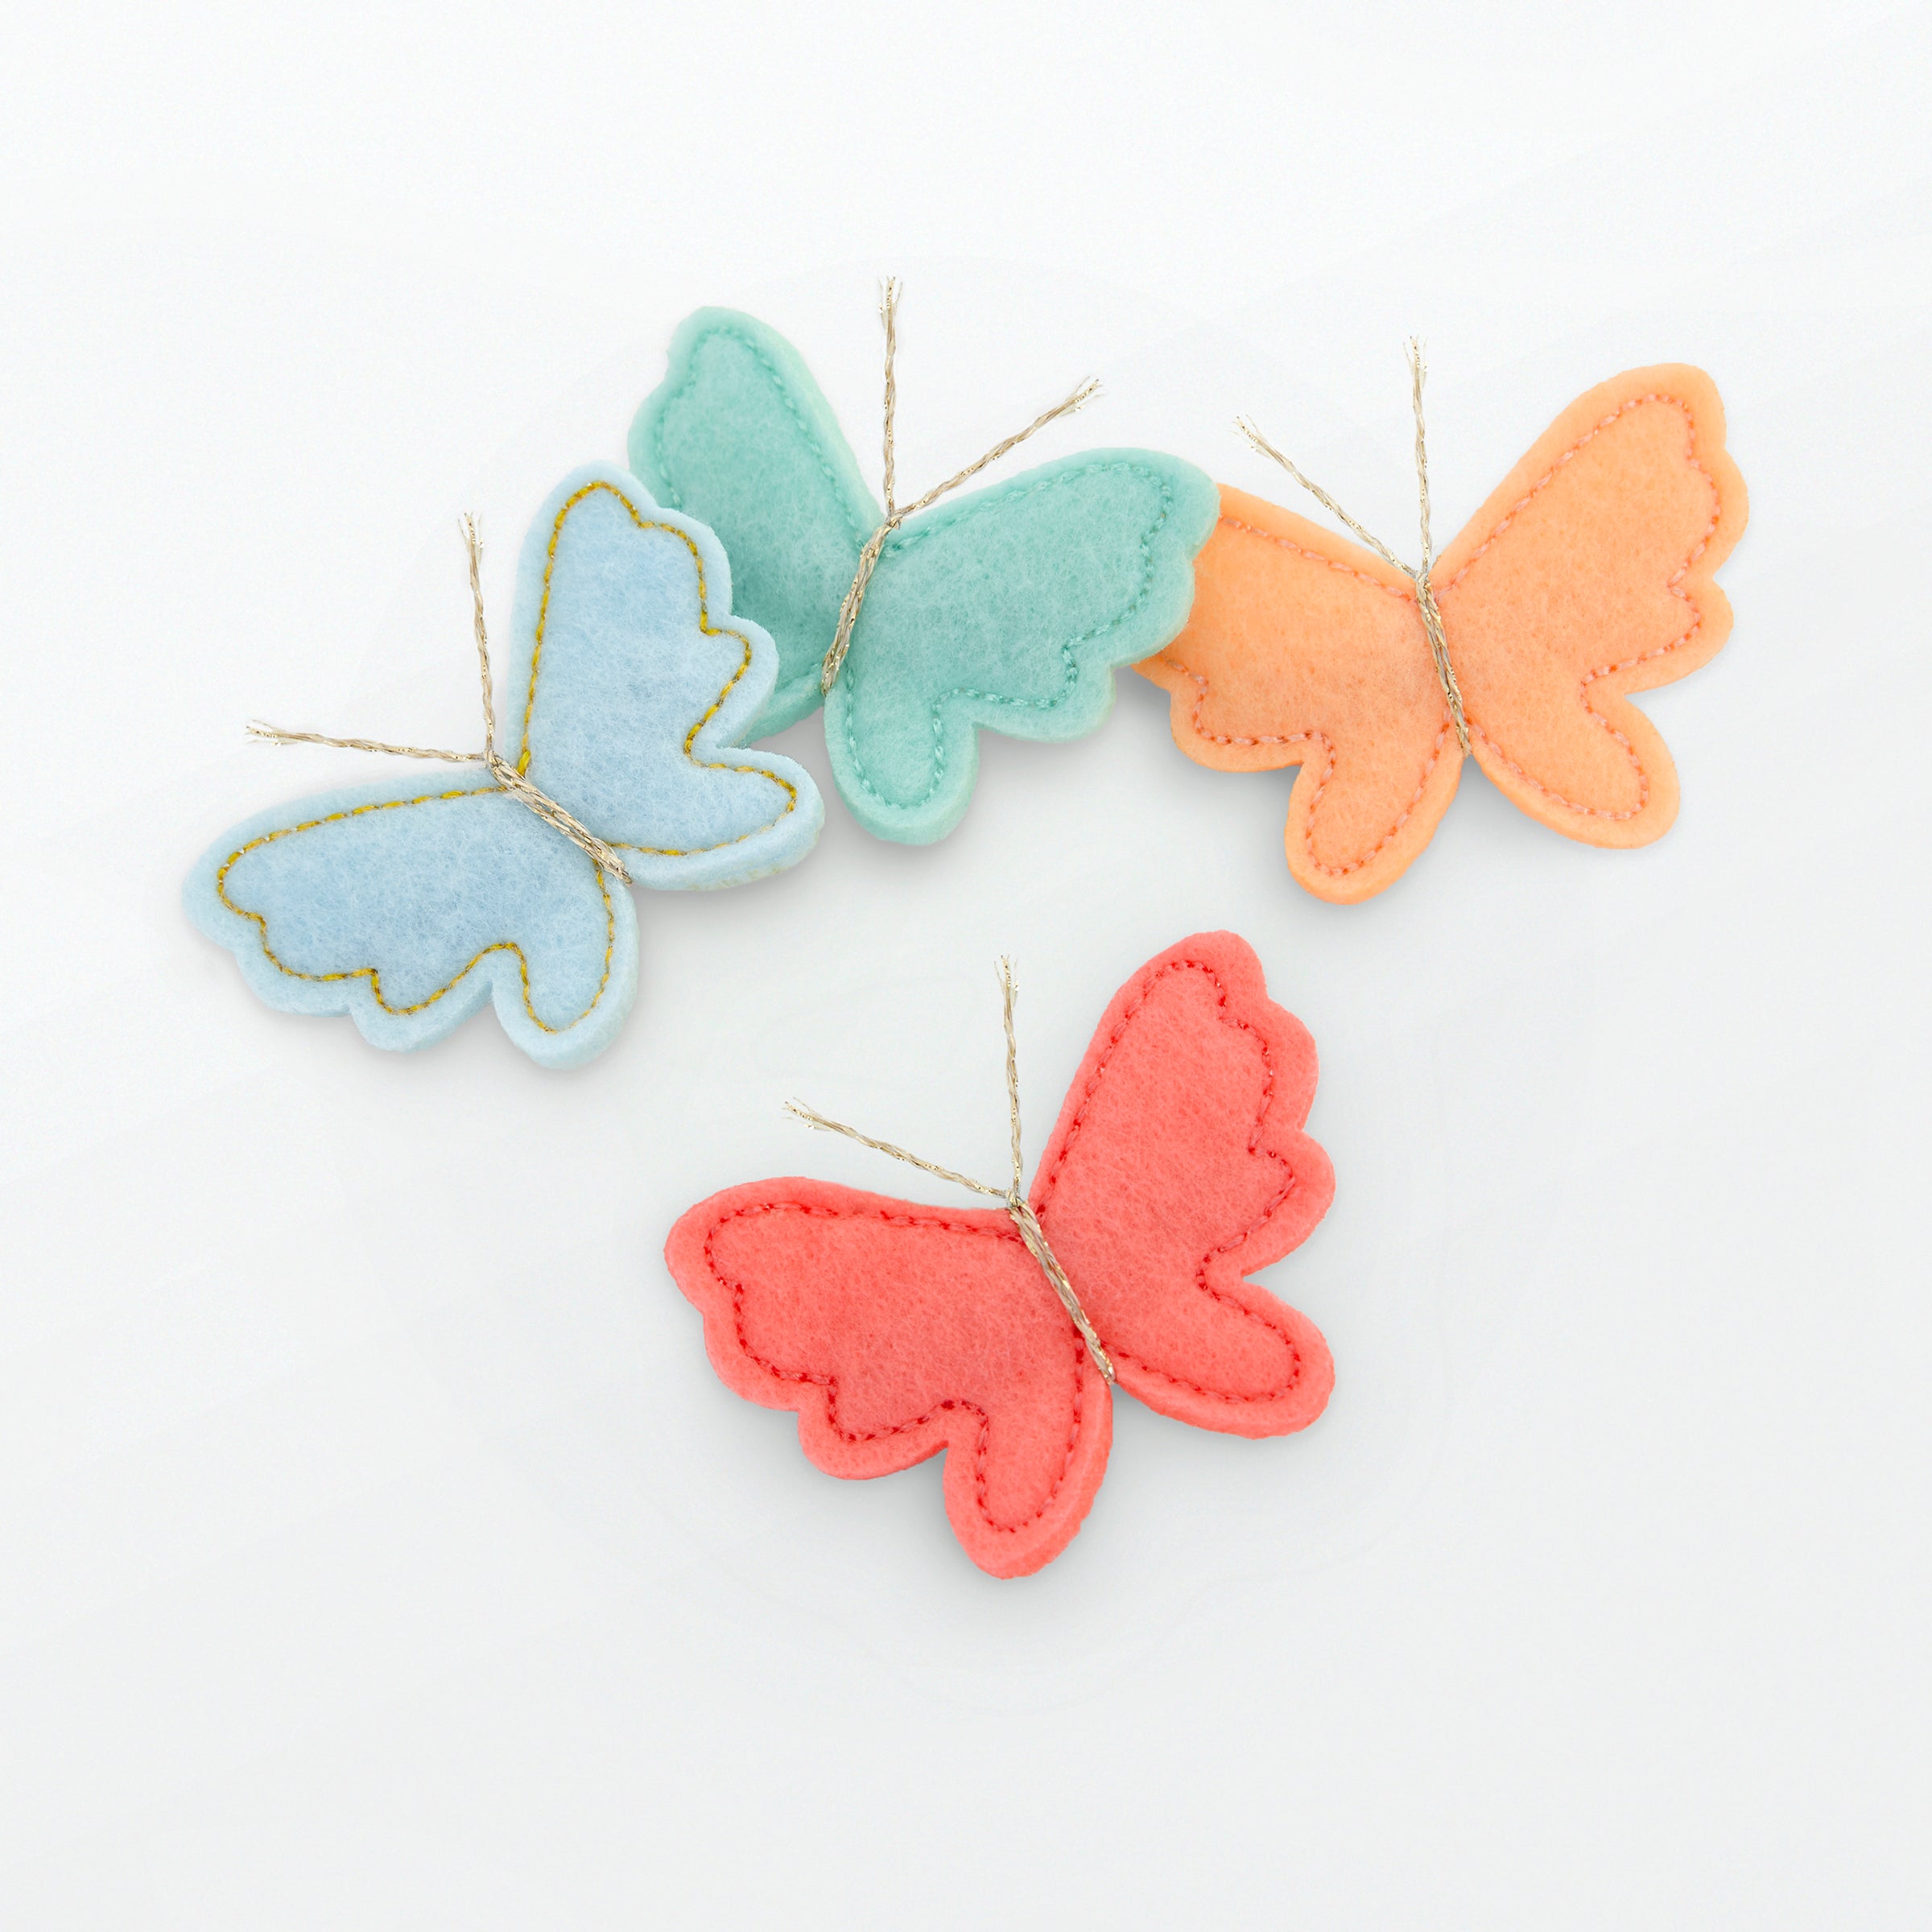 Our butterfly hair accessories are beautifully crafted from colourful felt with sweet metallic gold antennae.